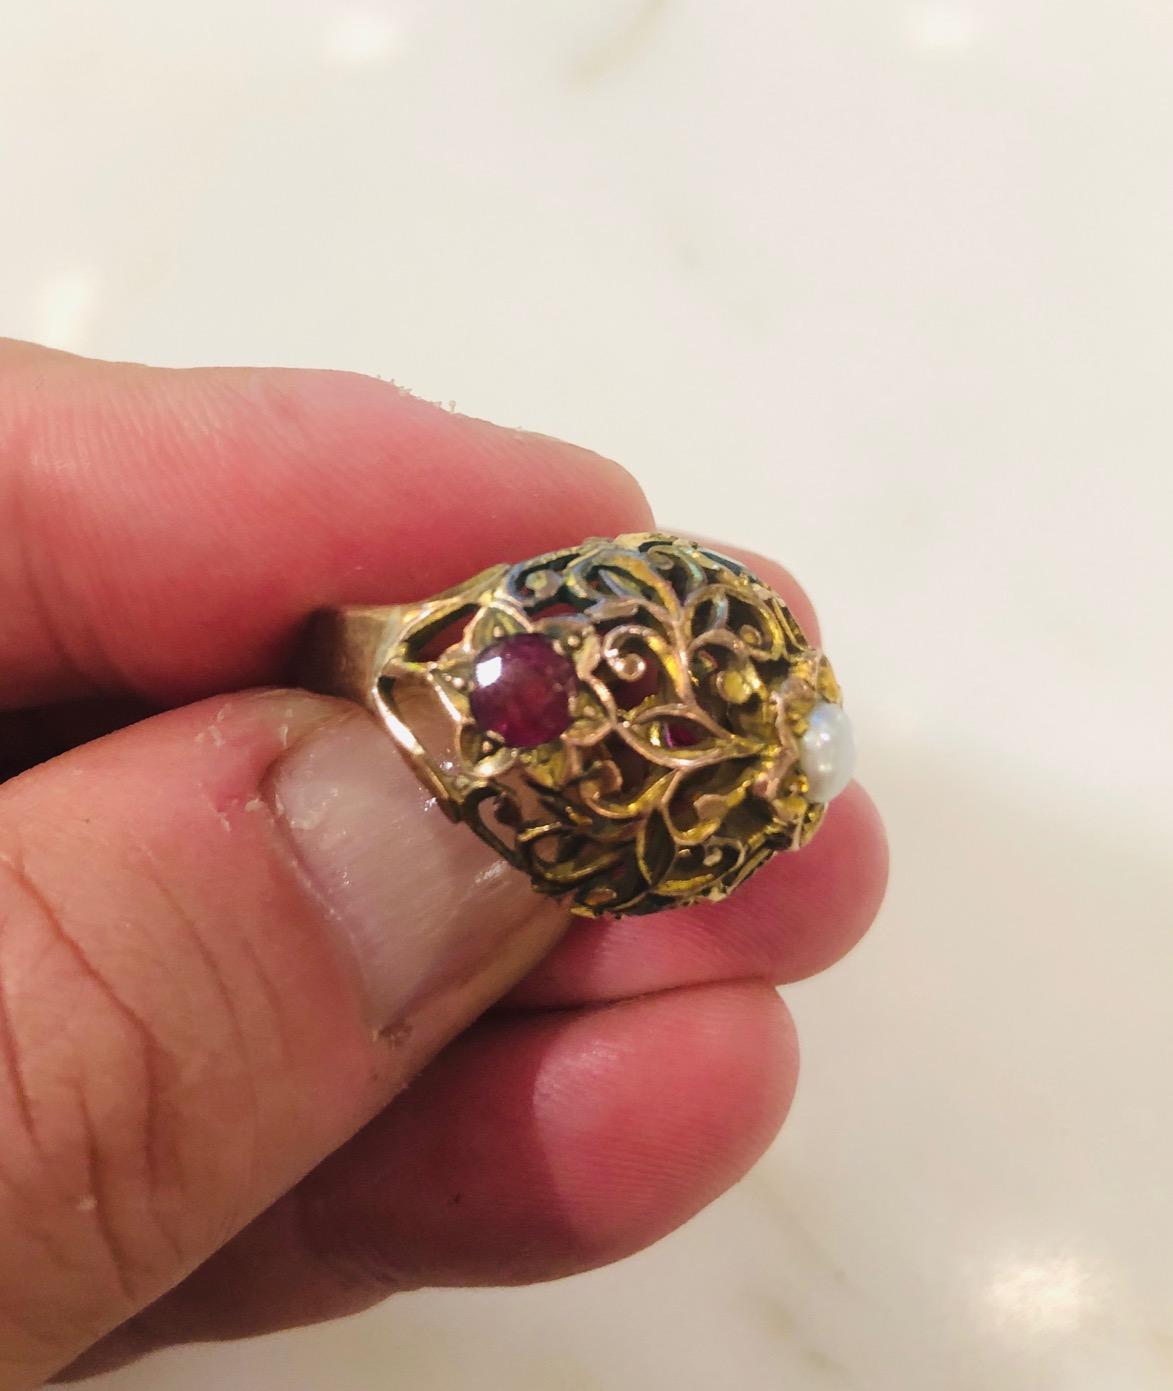 indian antique Filigre work gold Princess Dome Ring with natural pearl, emerald and rubies.
US size 7